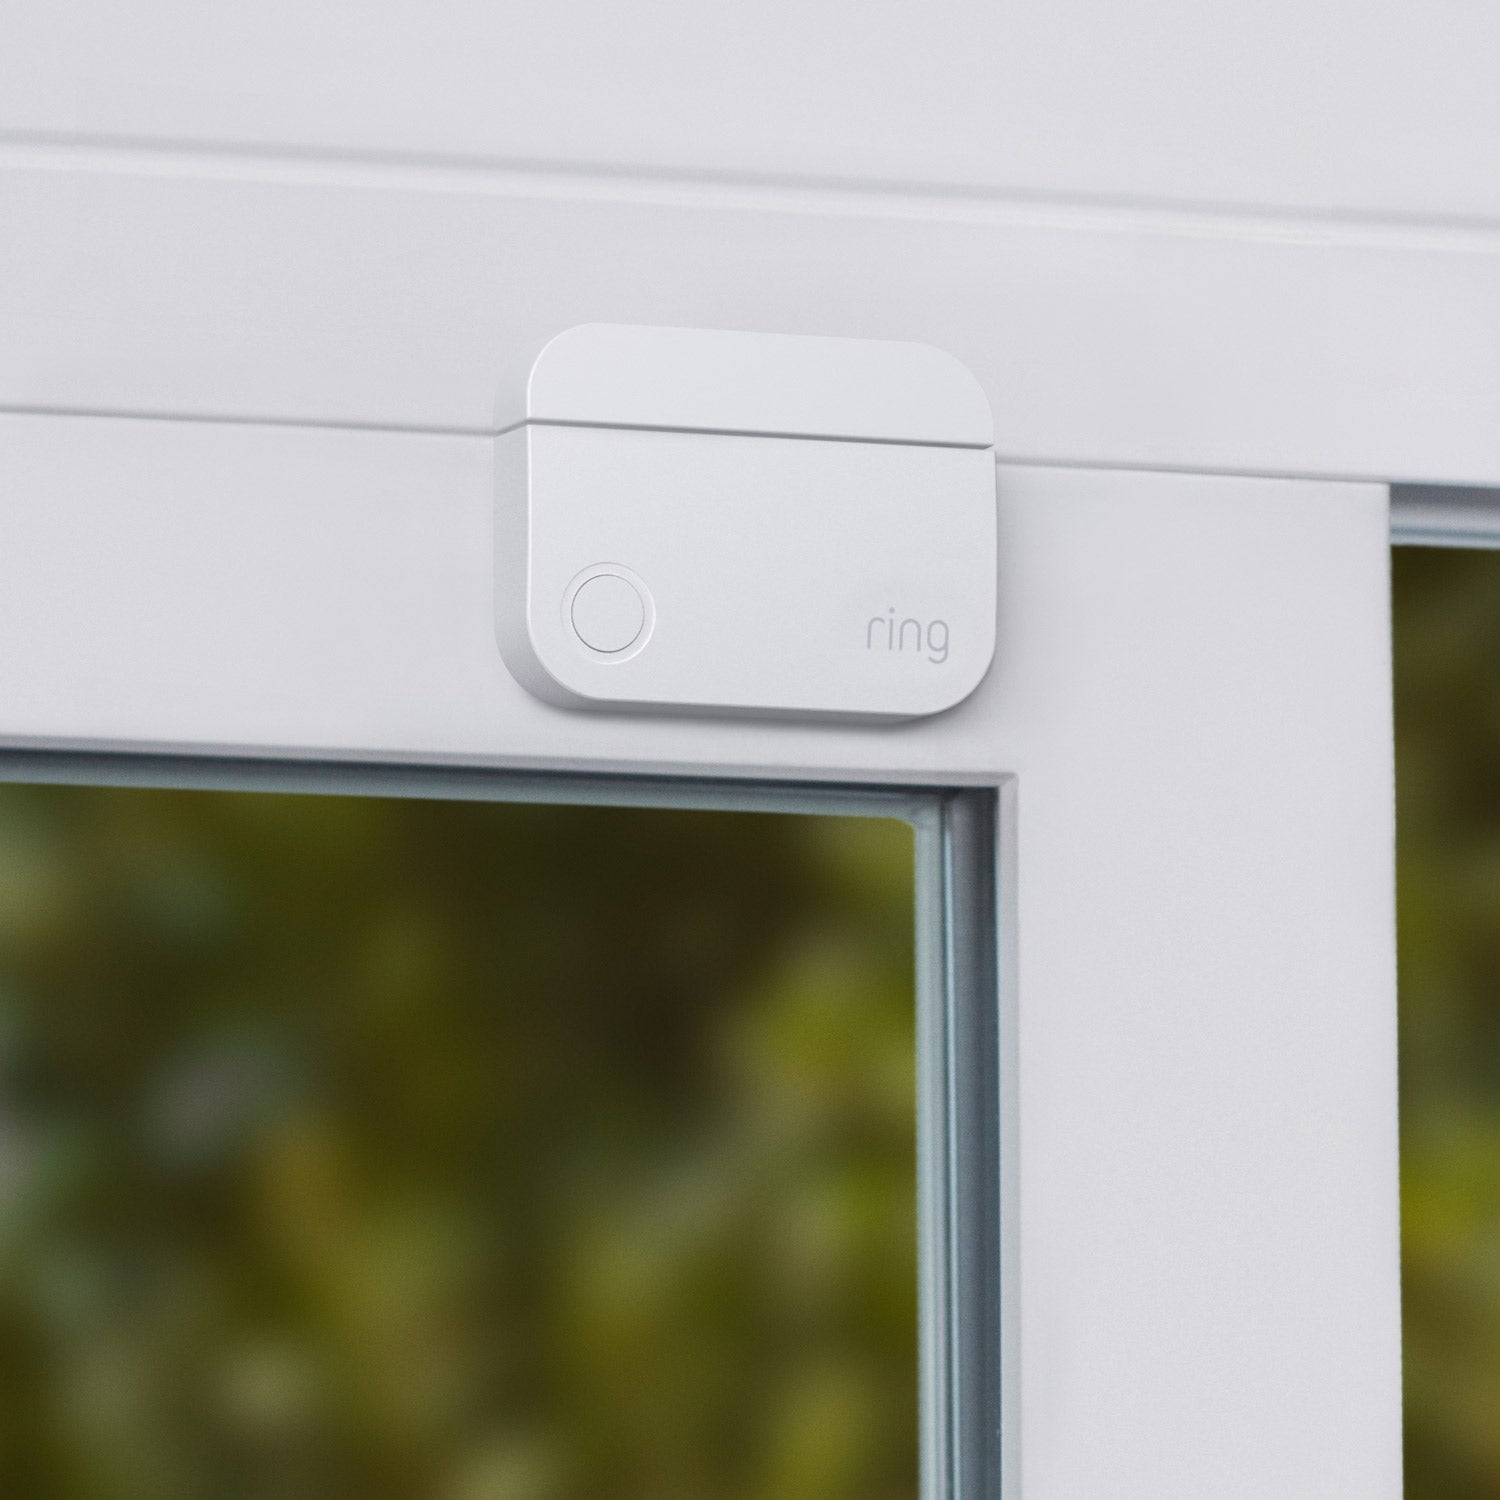 Alarm Pro, 13-Piece Kit (with built-in eero Wi-Fi 6 router and additional eero 6 Wi-Fi Router) - Close-up of Door Contact Sensor for Alarm Pro Security Kit mounted to top frame of white door.